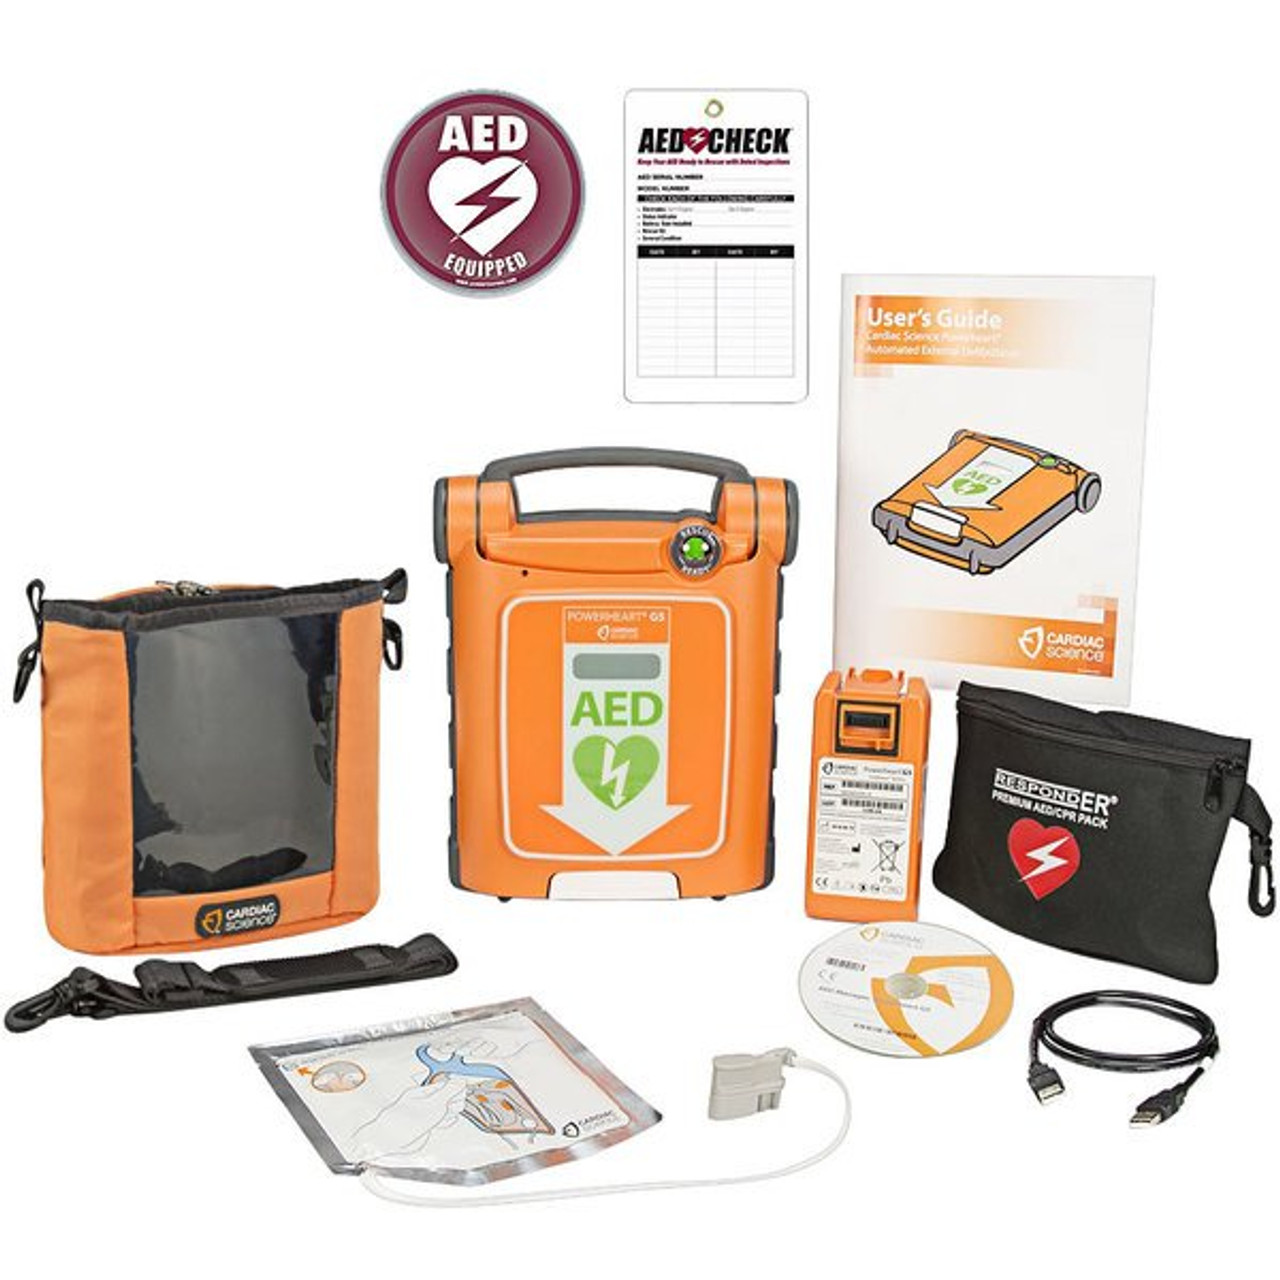 Zoll AED Powerheart G5 Defibrillator & Accessoy, AED ICPR